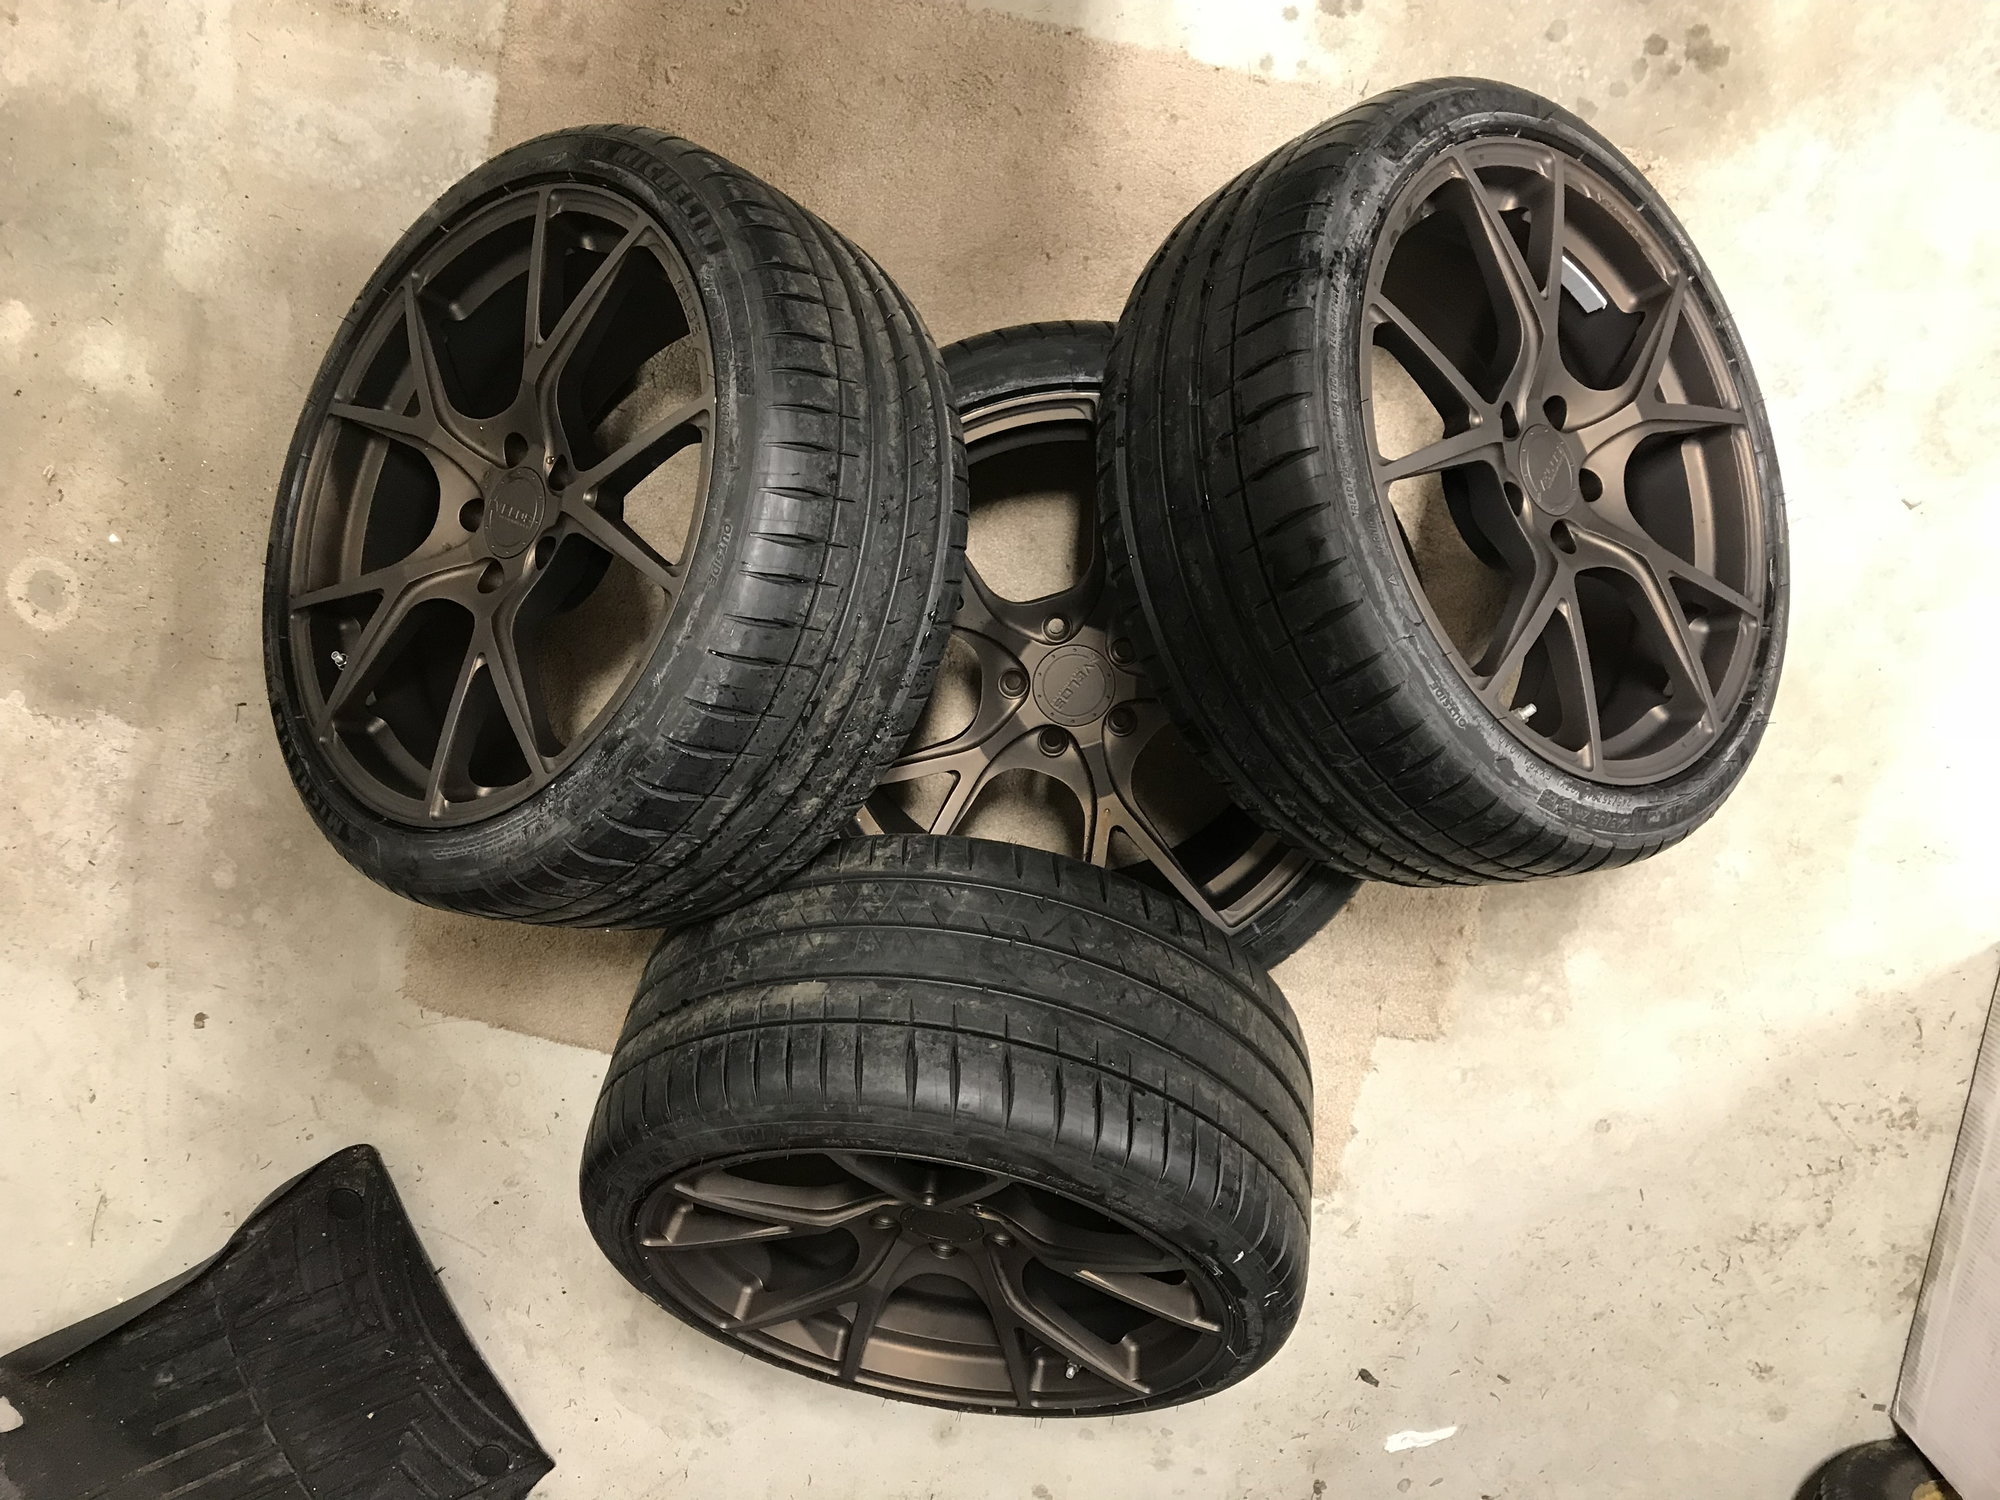 Wheels and Tires/Axles - 19" Velos S3 (Death Bronze) w/Michelin Pilot Sport 4s - Used - West Newbury, MA 01985, United States